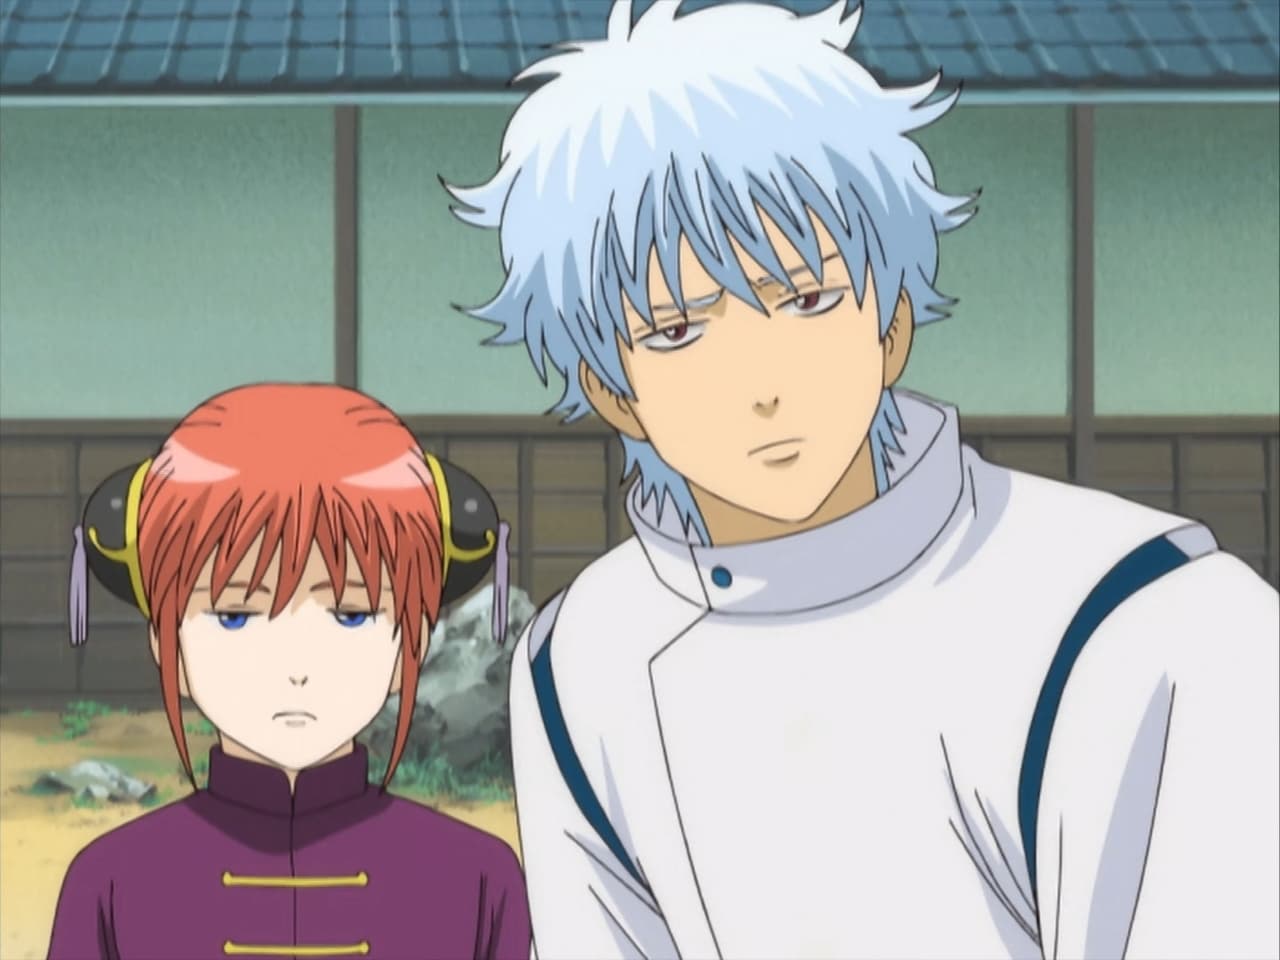 Gintama - Season 1 Episode 20 : Watch Out For Conveyor Belts!